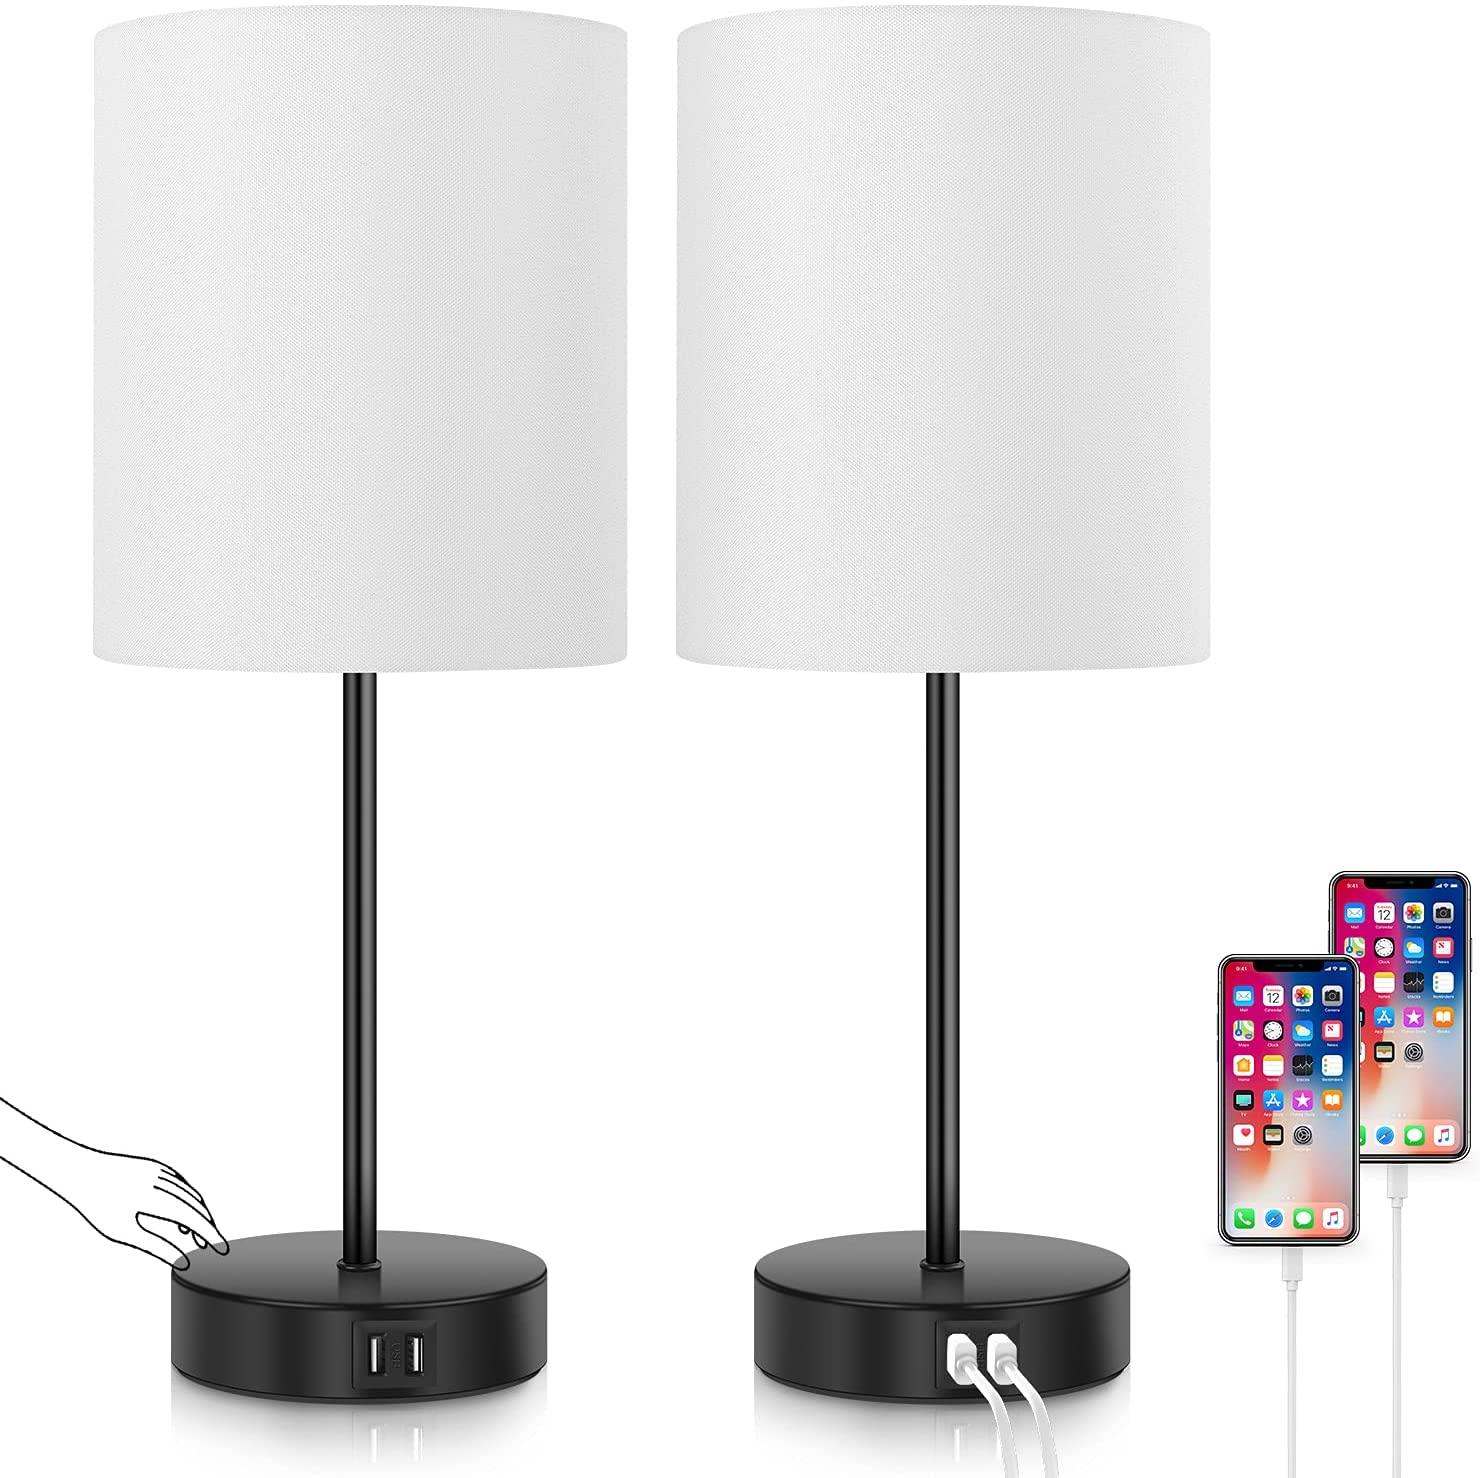 2 Touch Control Dimmable Desk Lamp for $32.99 Shipped